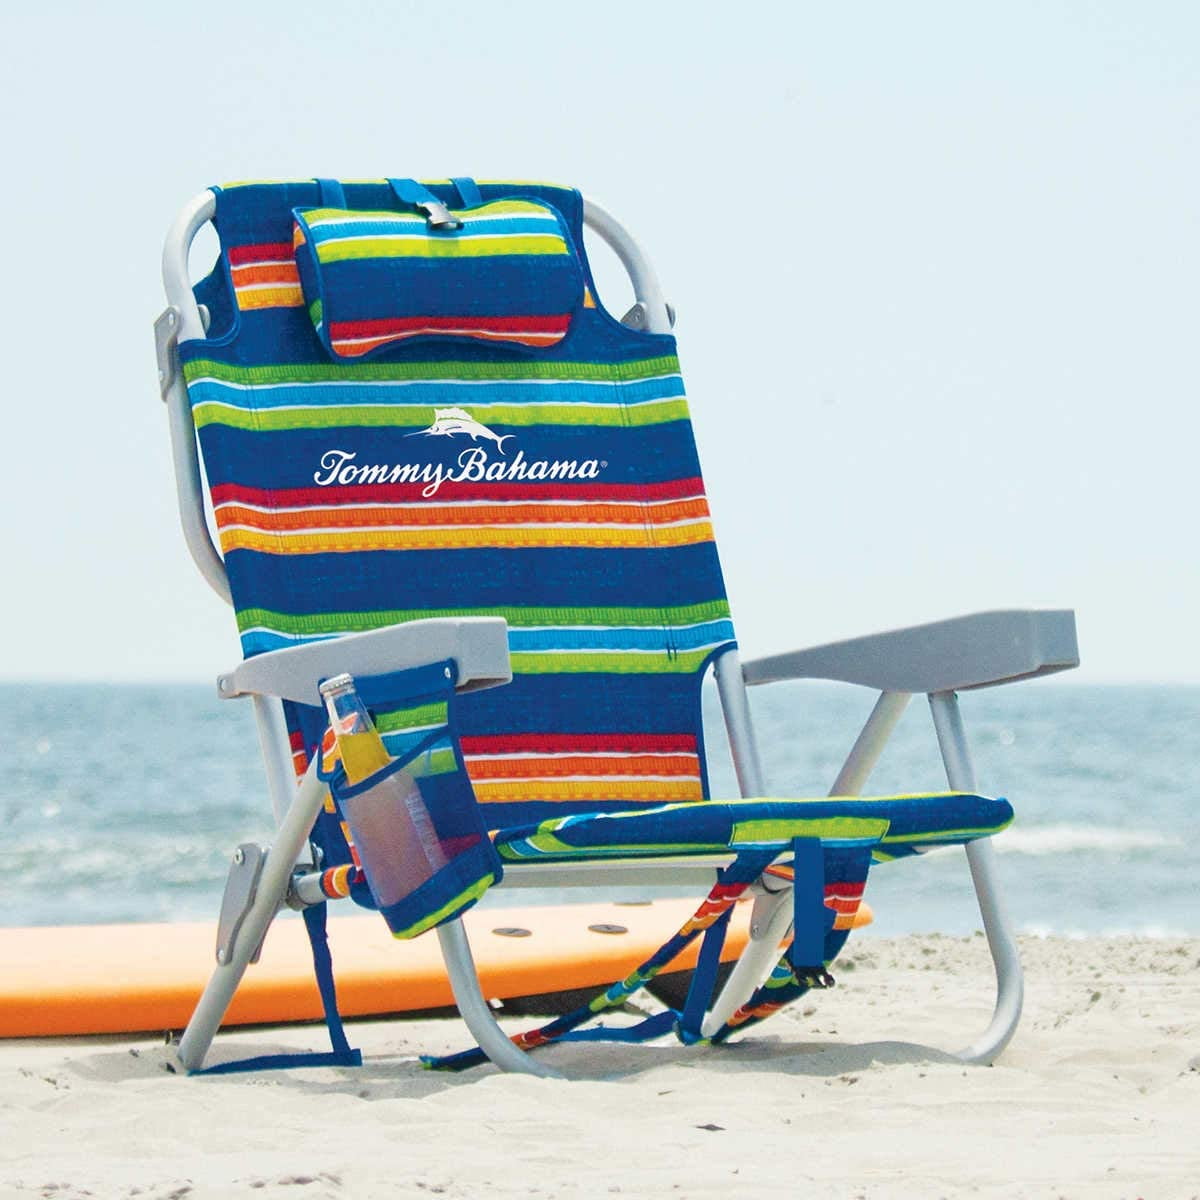 2 Tommy Bahama Backpack Beach Folding Deck Chair Pineapple NEW COLLECTION 2020 